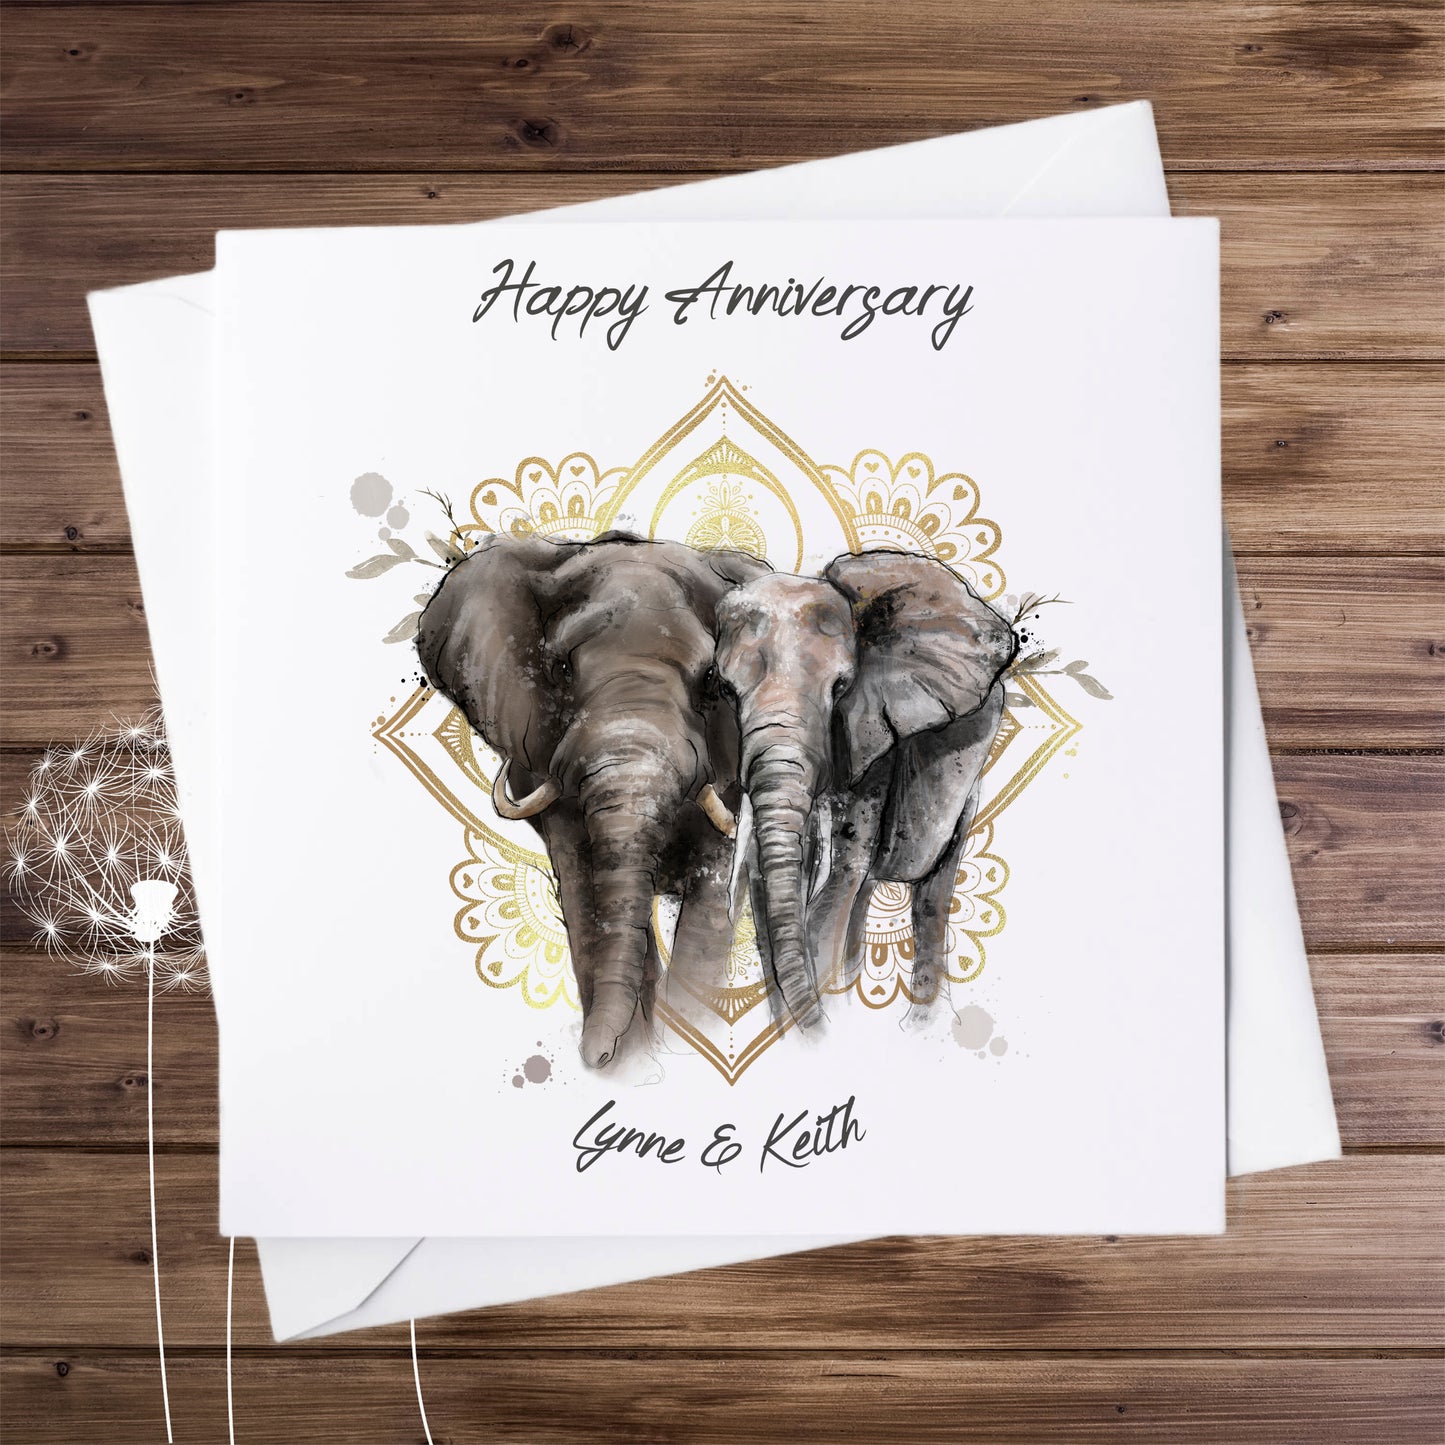 Elephant Gifts | Gifts for Elephant Lovers